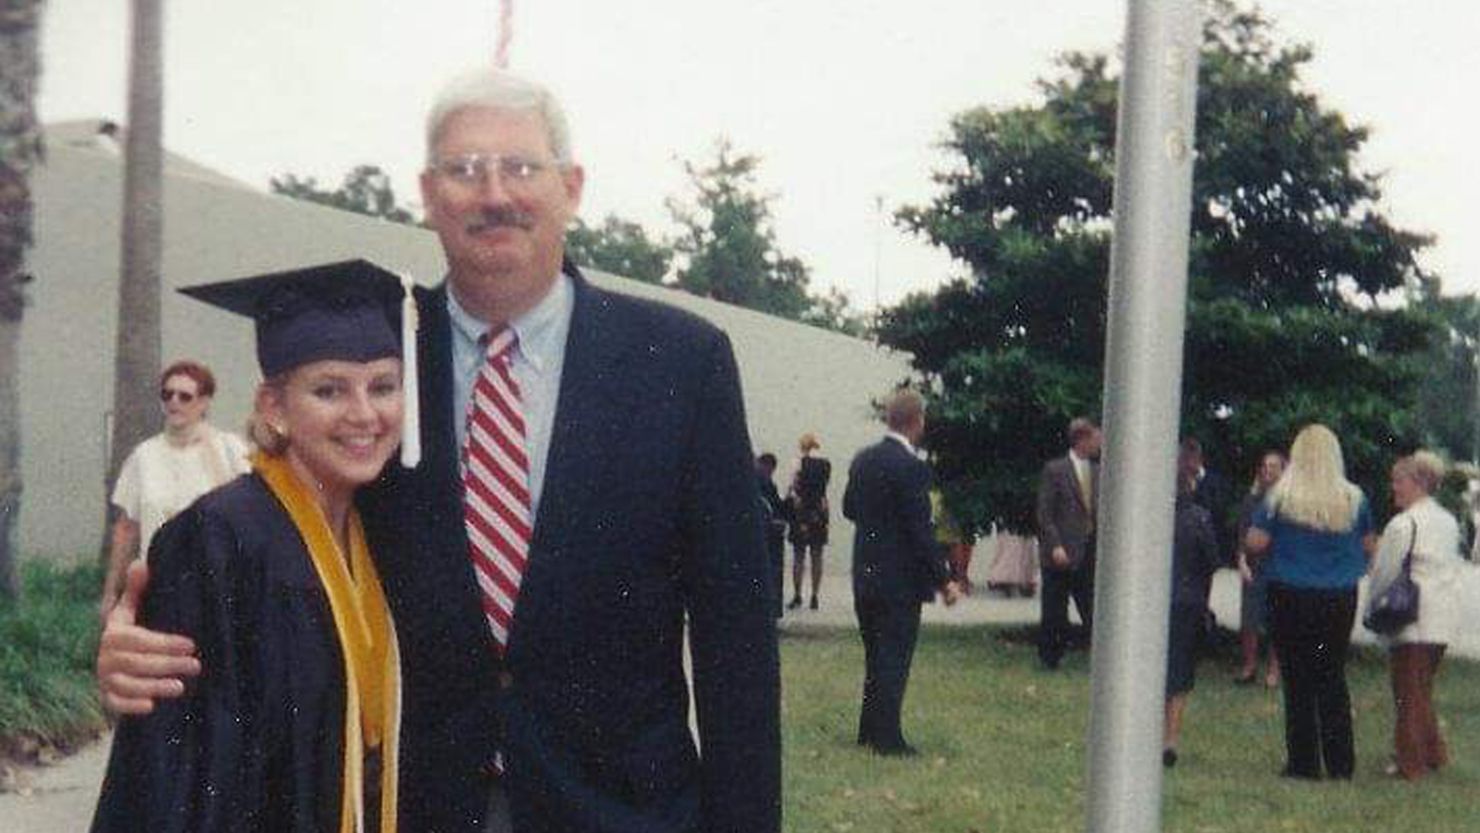 The writer, Sarah Levinson Moriarty, with her father, Robert Levinson, in 2001. Robert was taken captive by Iran in 2007 and never returned. The new national hostage day on March 9 will raise awareness of wrongly detained Americans.